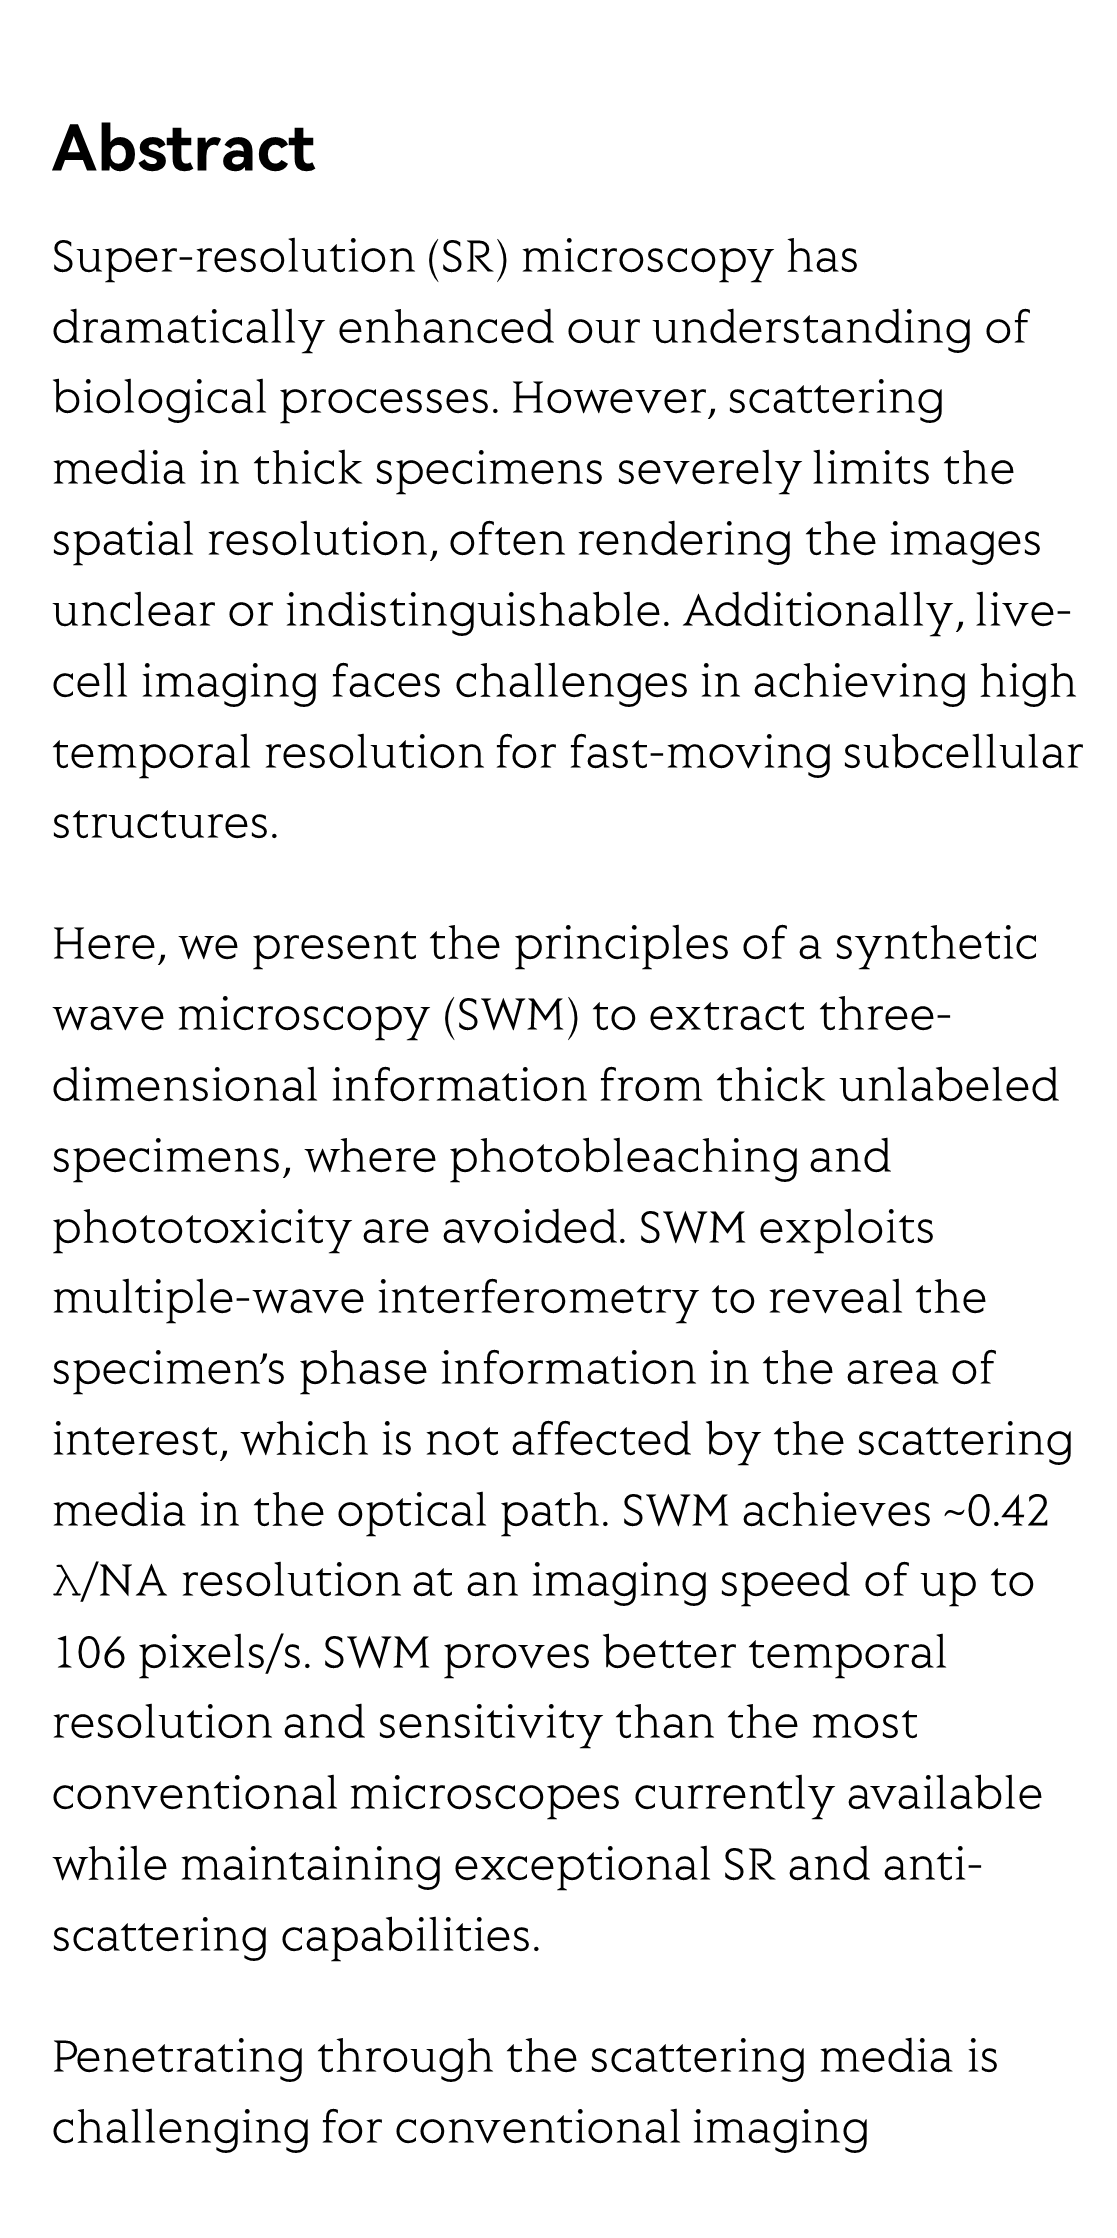 Improved spatiotemporal resolution of anti-scattering super-resolution label-free microscopy via synthetic wave 3D metalens imaging_2